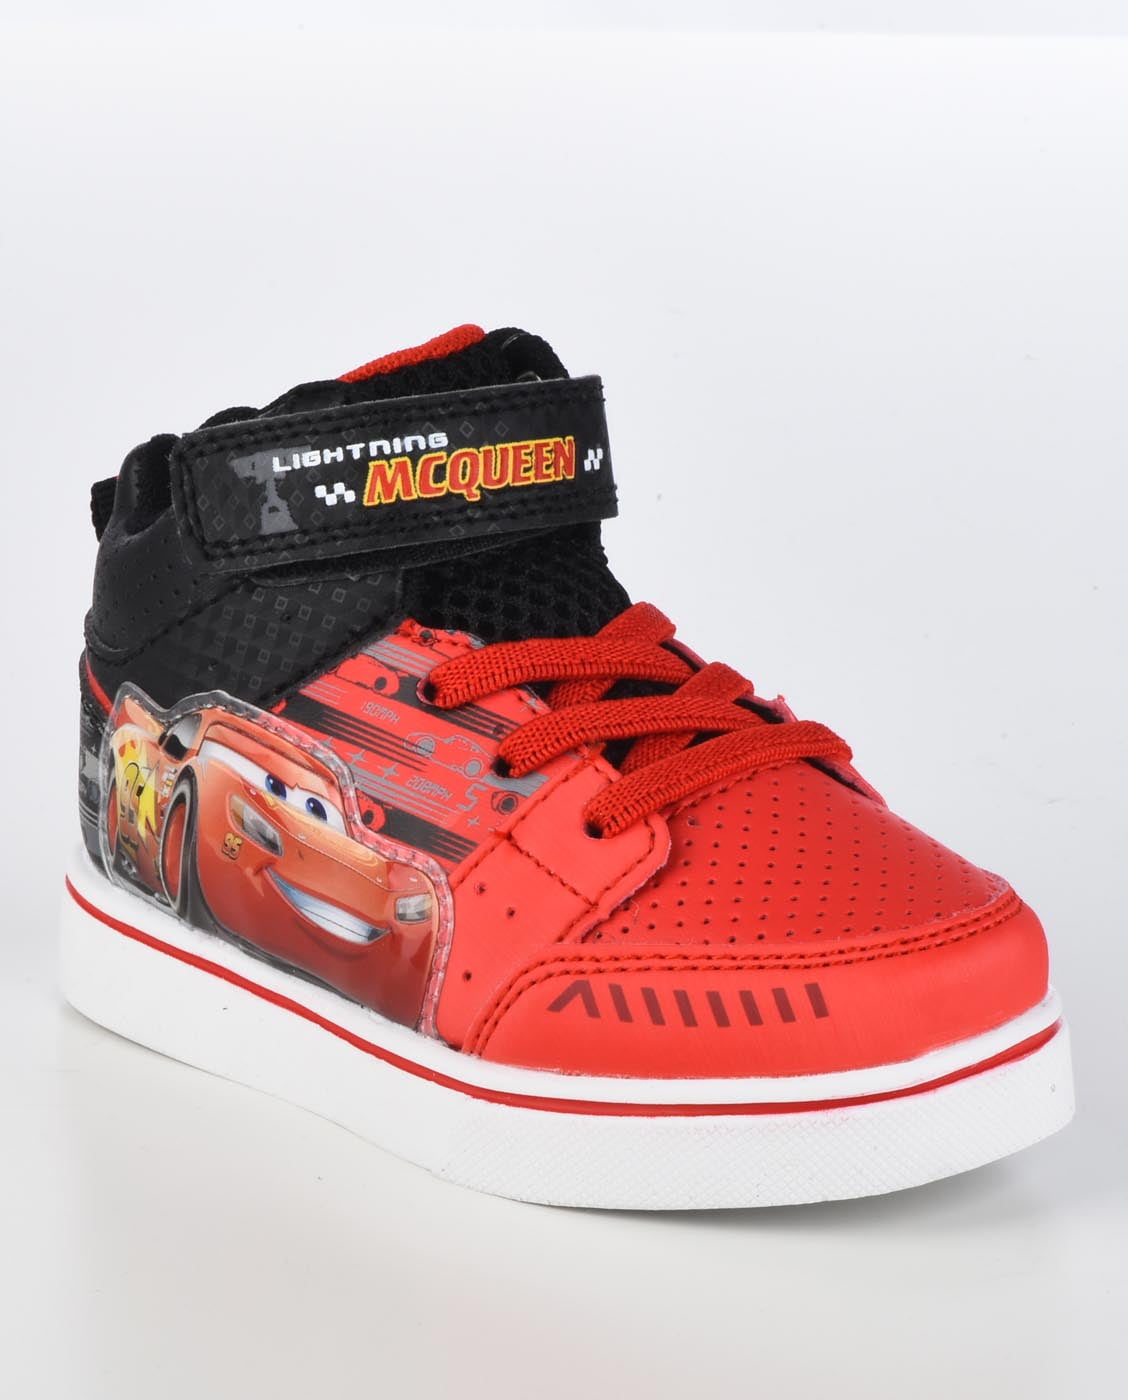 lightning mcqueen shoes size 13